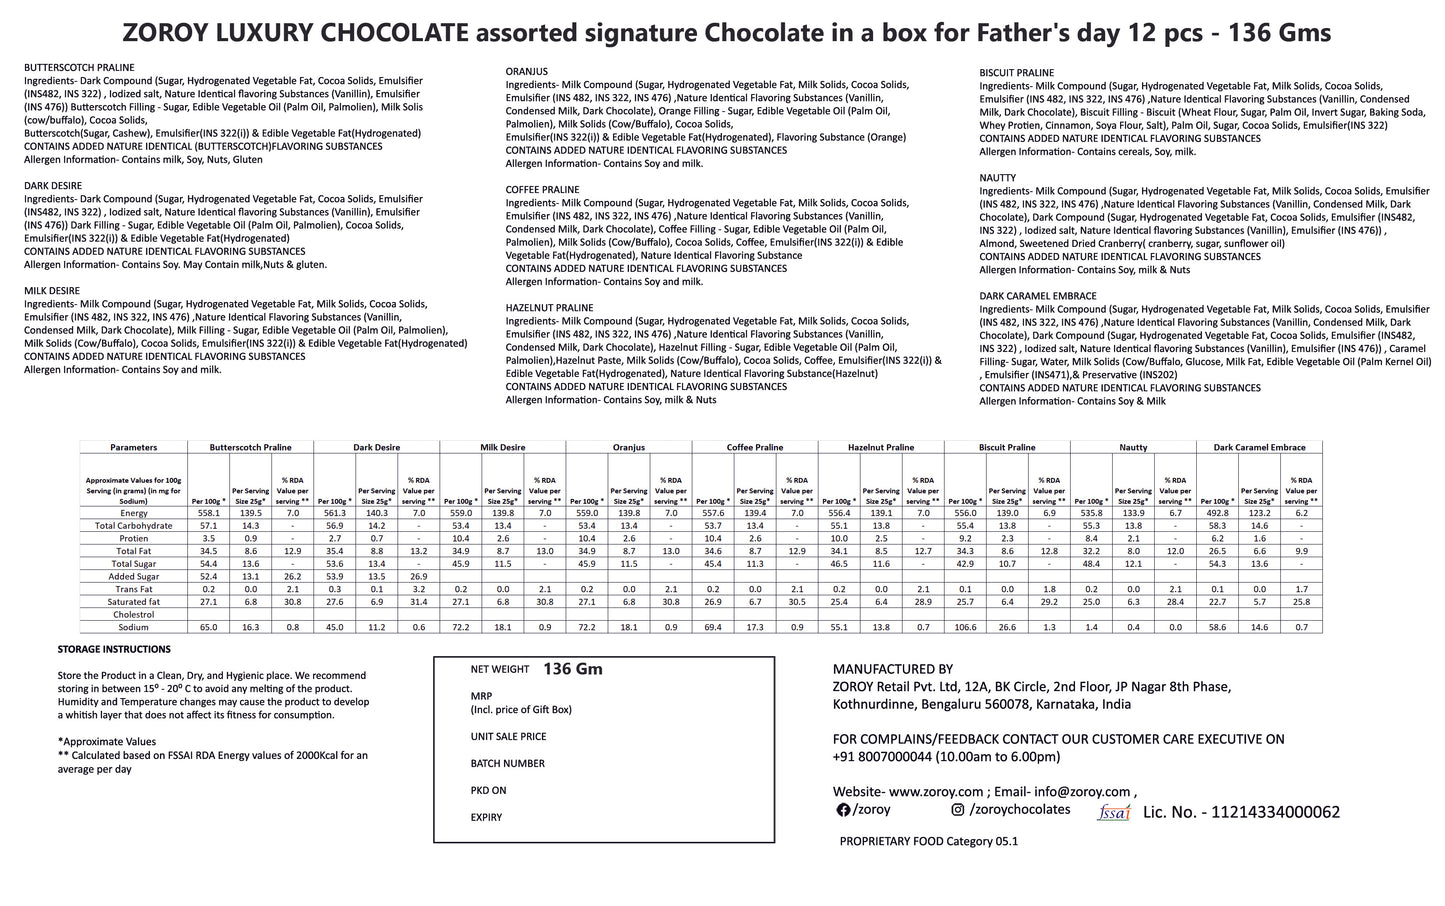 ZOROY Father's Day Assorted Chocolate Gift Box of 12 - 132 Gms